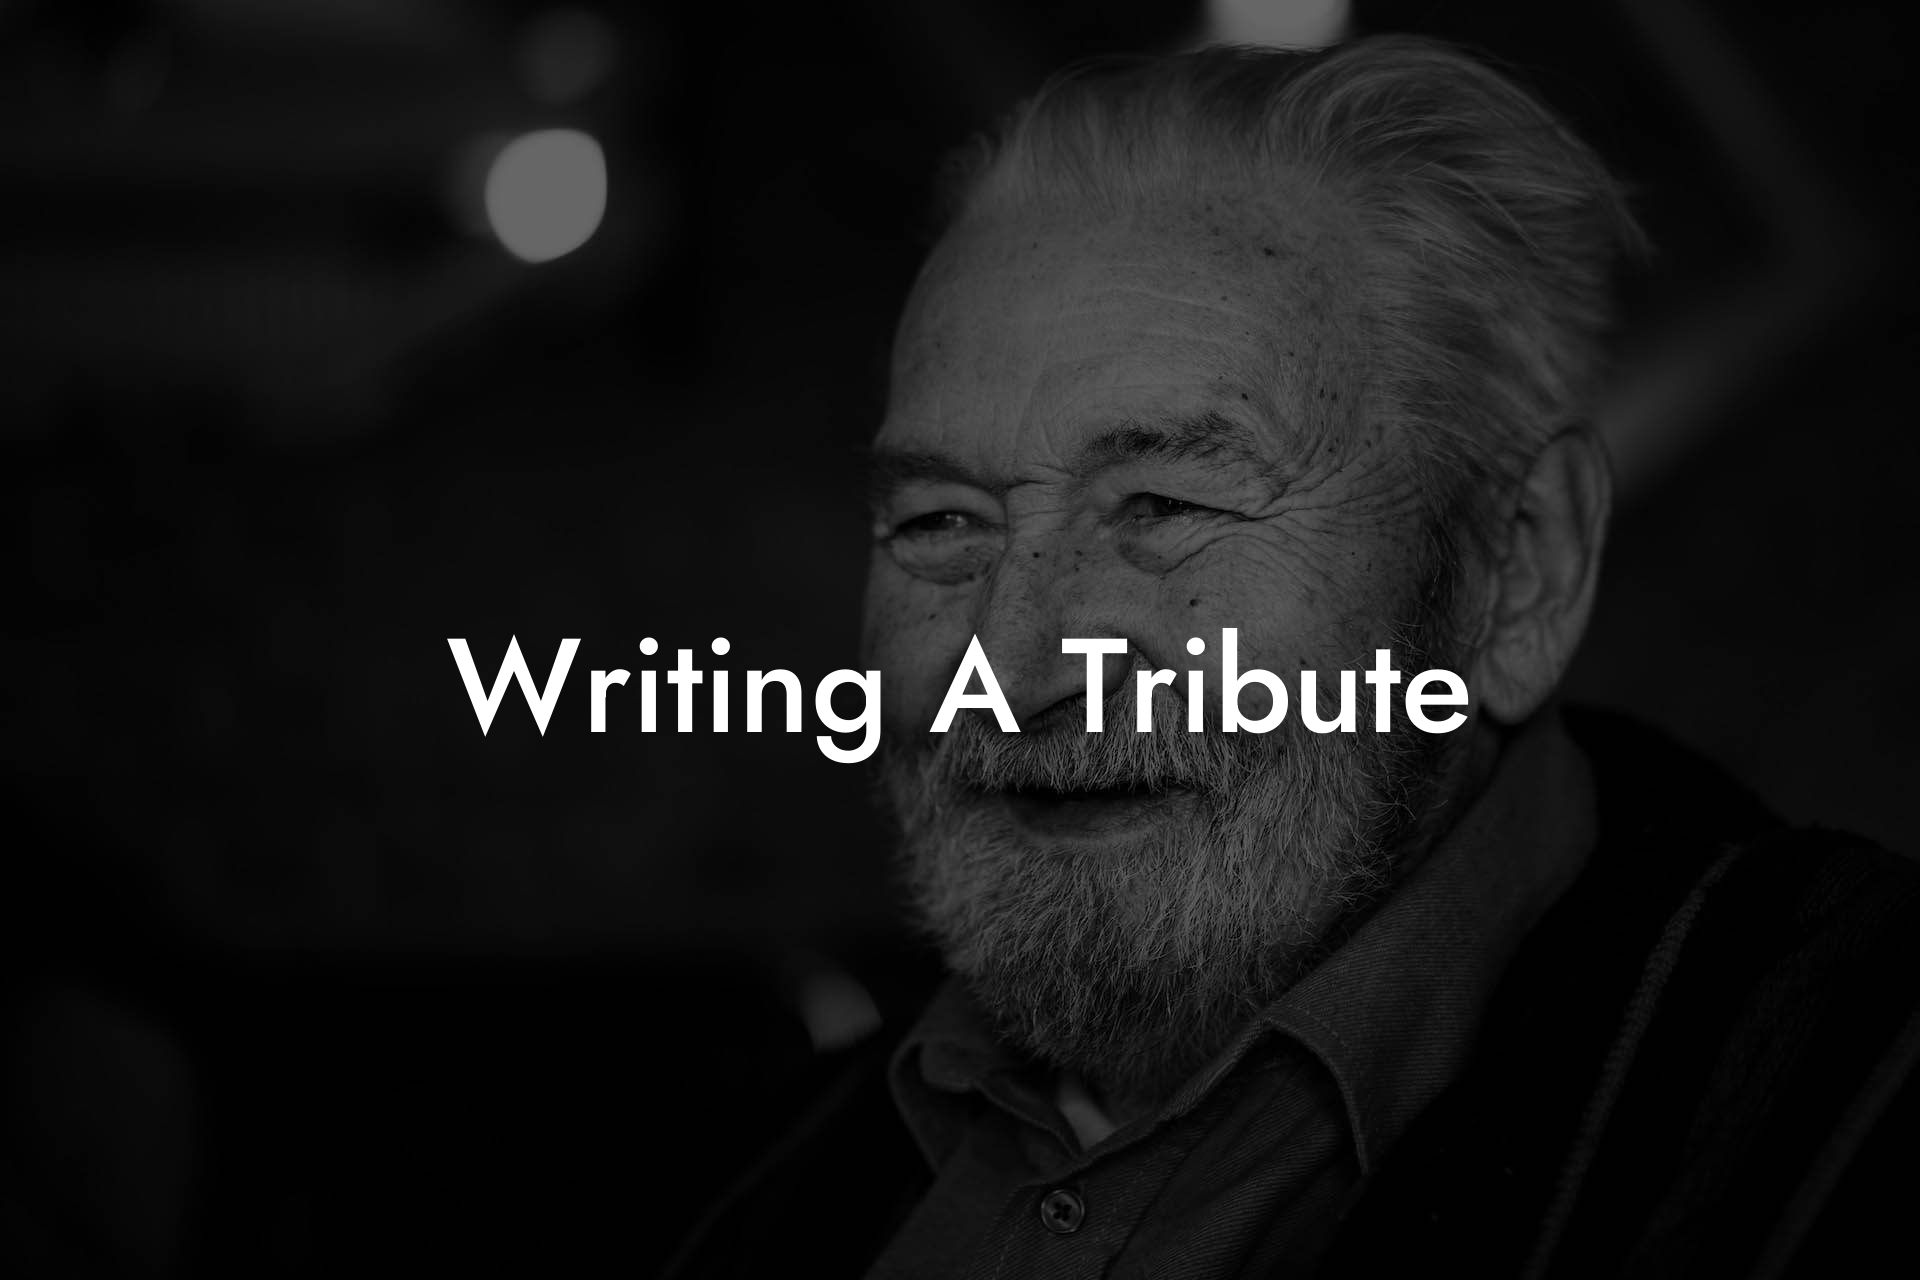 Writing A Tribute